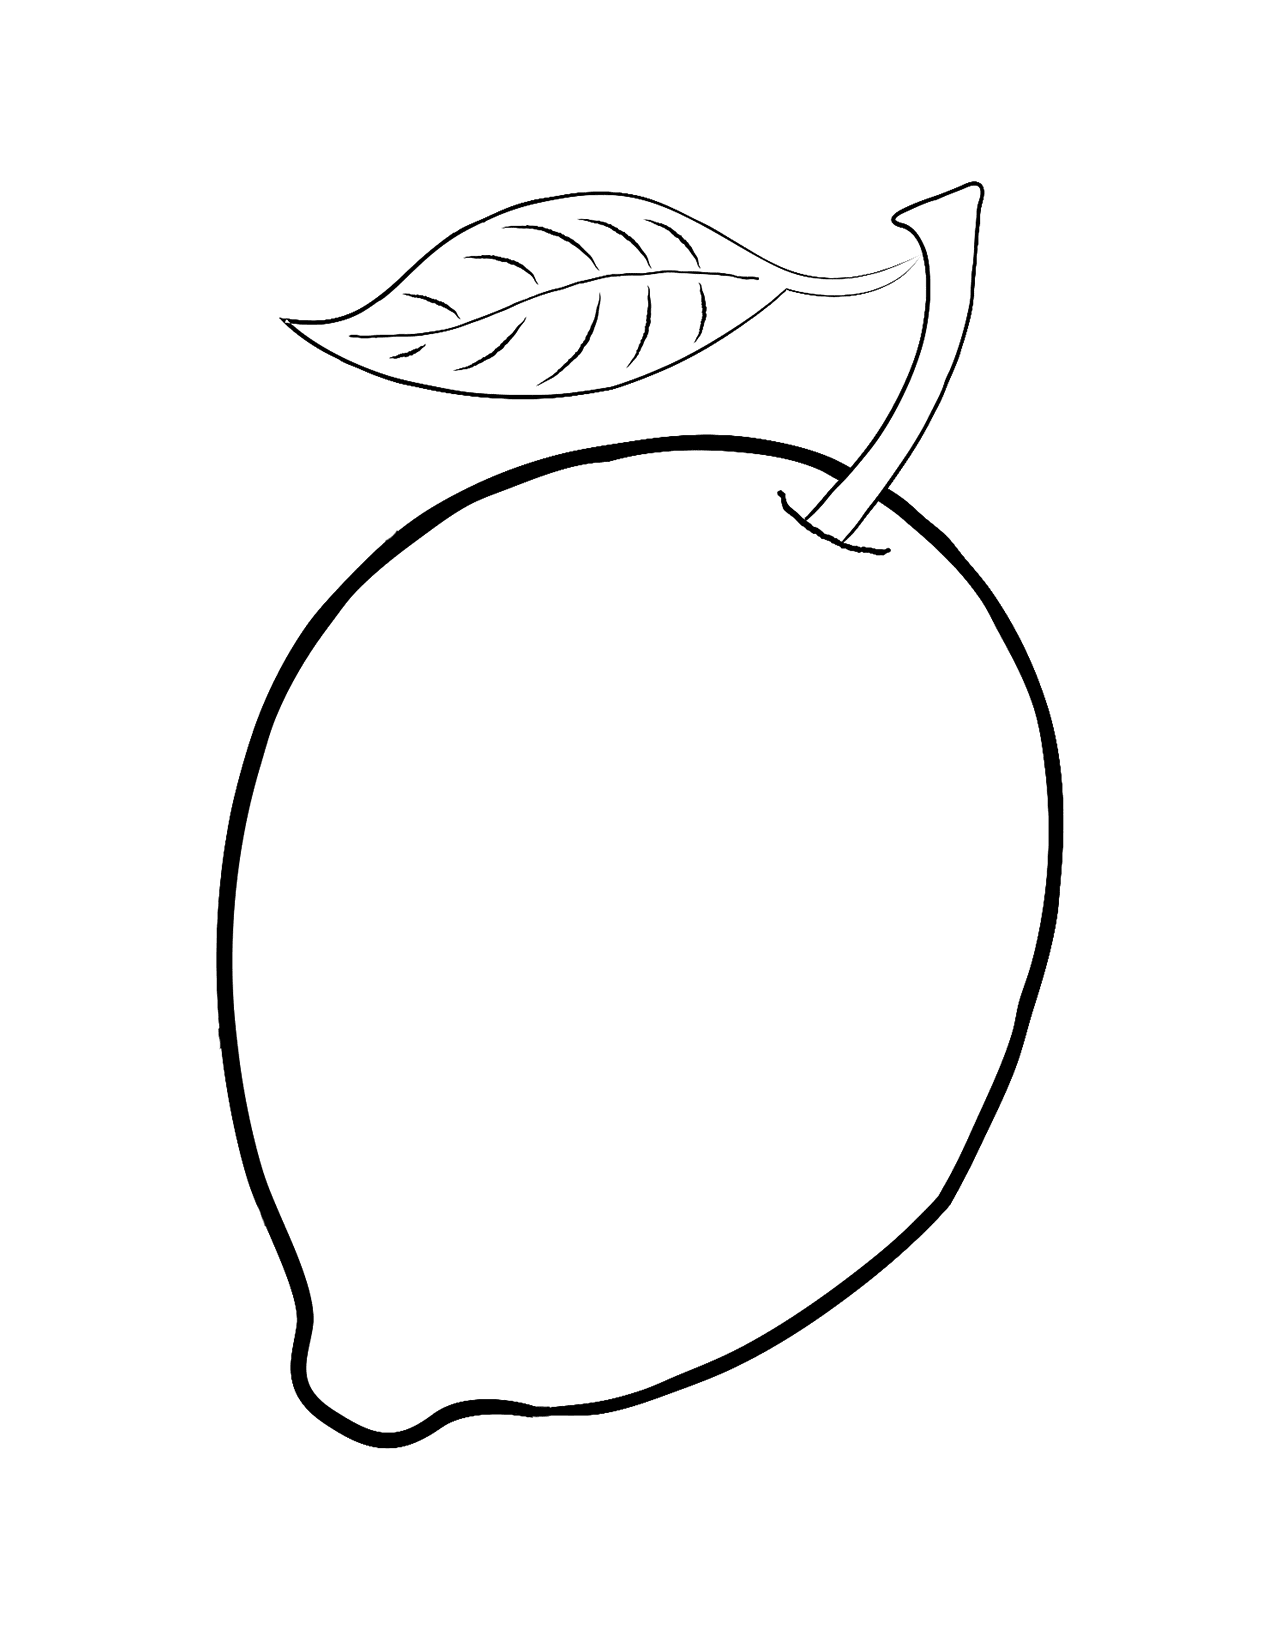 Easy Lemon Coloring Page